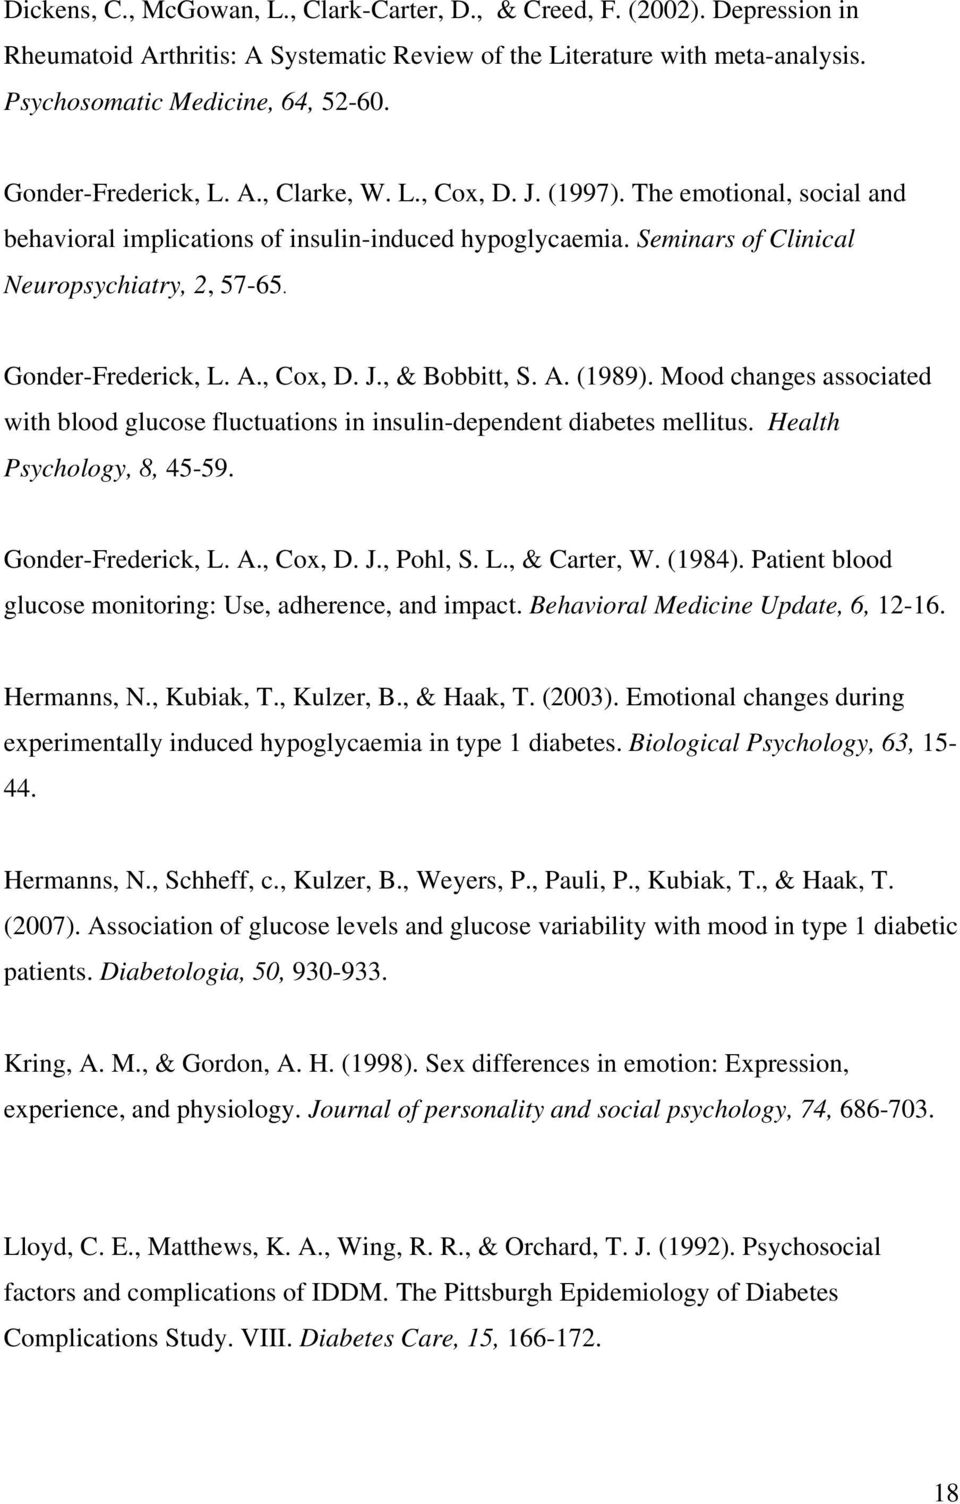 Gonder-Frederick, L. A., Cox, D. J., & Bobbitt, S. A. (1989). Mood changes associated with blood glucose fluctuations in insulin-dependent diabetes mellitus. Health Psychology, 8, 45-59.